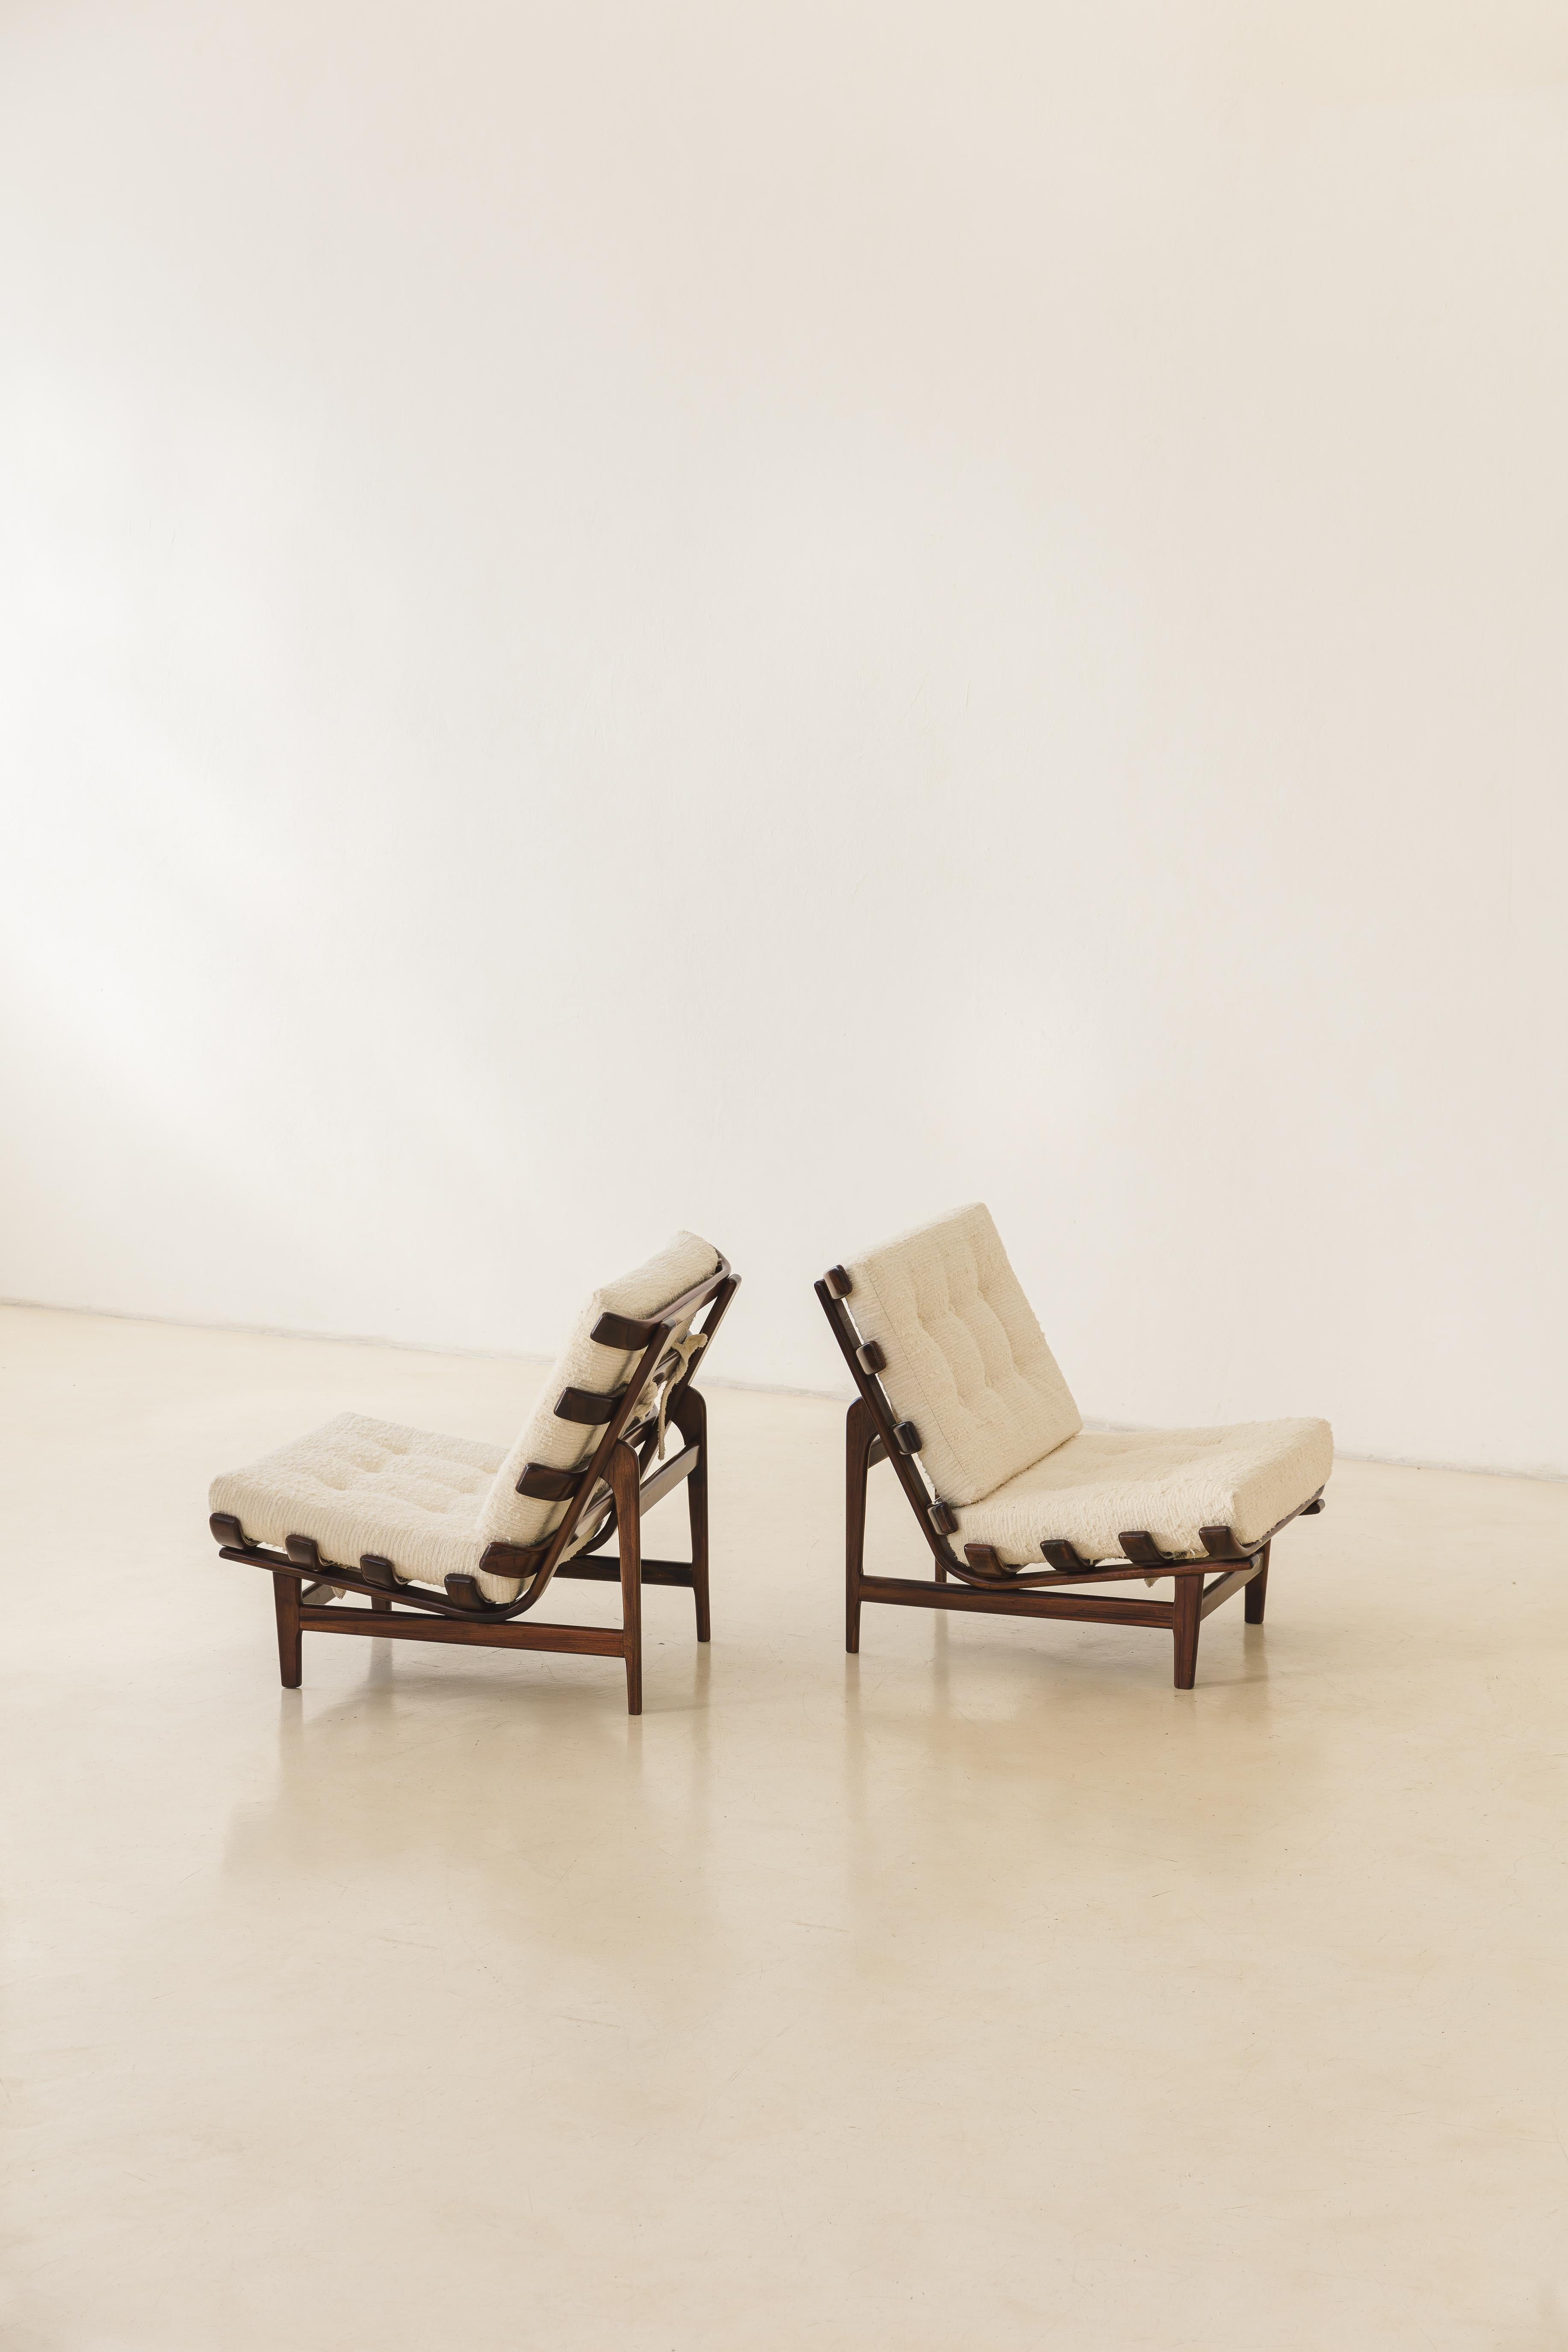 Pair of Armchairs by Móveis de Madeira Pailar, 1960s For Sale 4